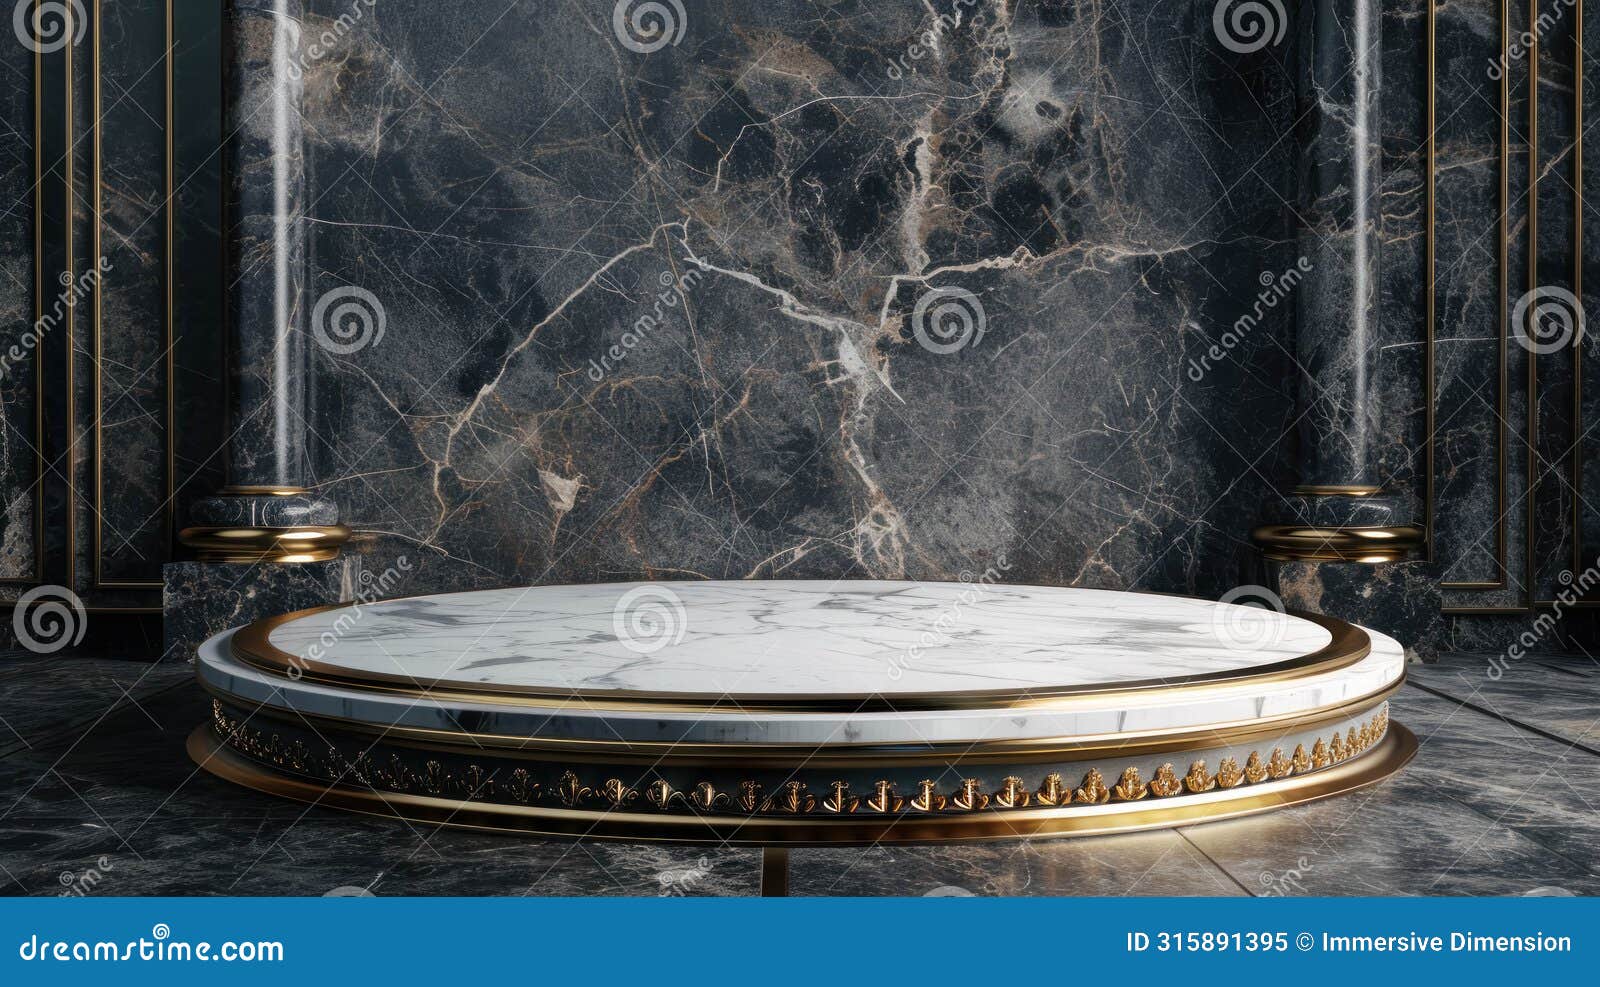 empty vintage marble 3d podiums set in an old-world charm setting for showcasing antiquities, luxury products or fashion clothing